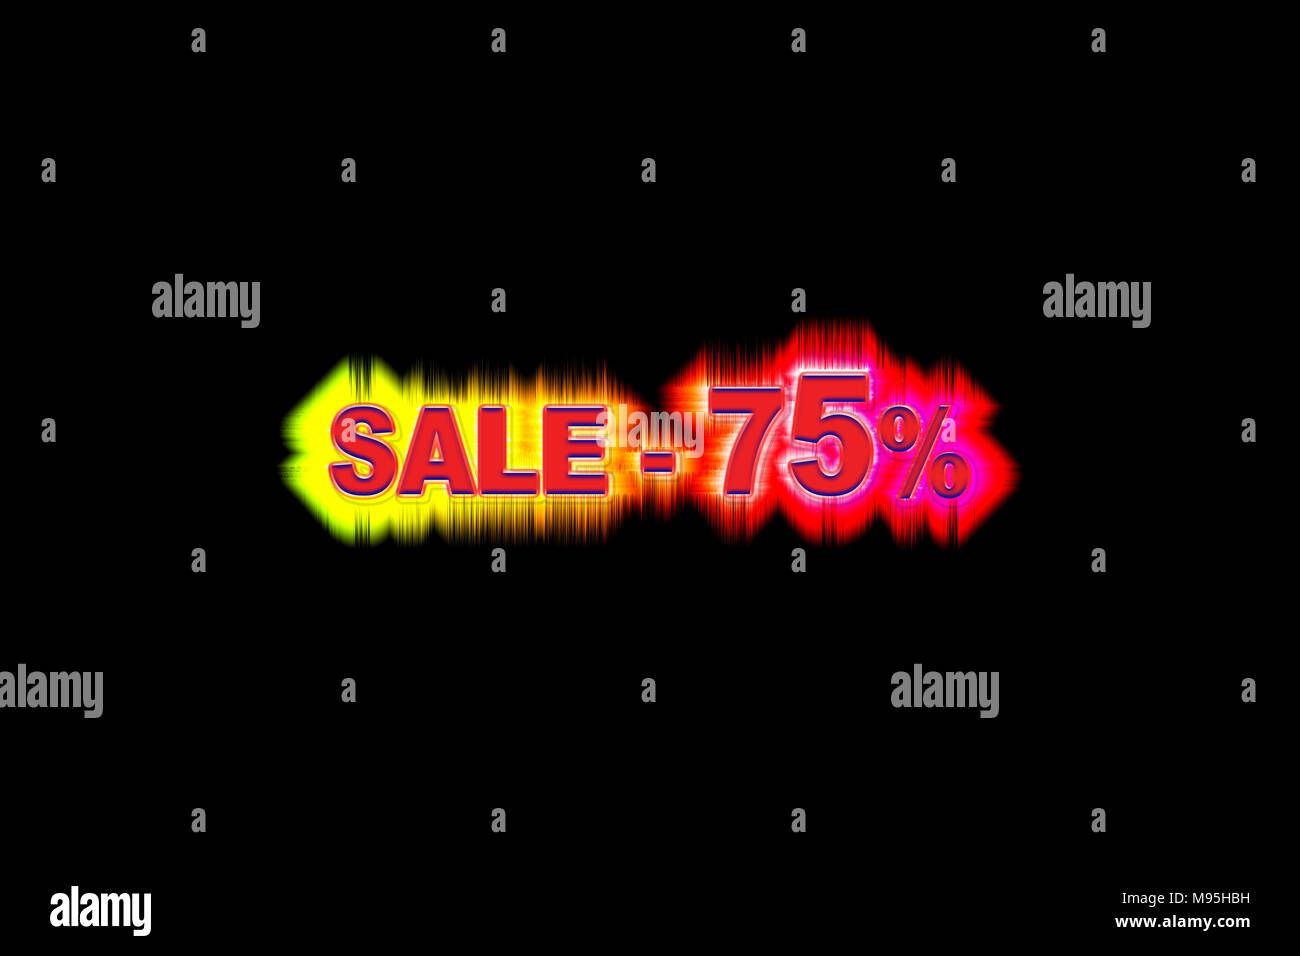 Discount seventy-five per cent of the simulated volume with a rainbow glow on a black background Stock Photo